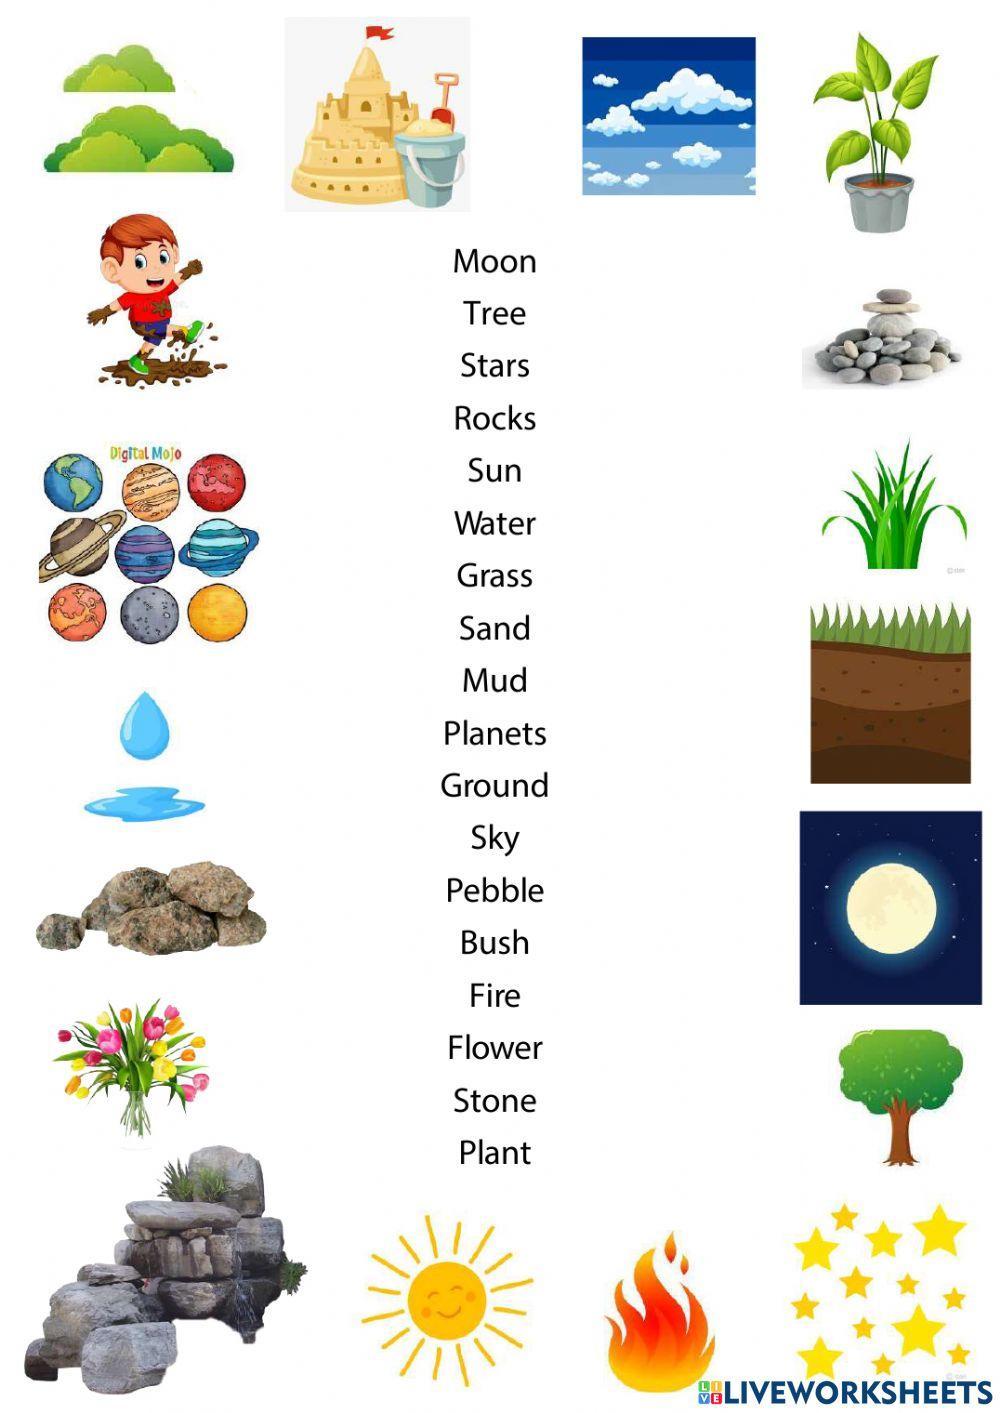 Nature - Vocabulary 1° / 2° Free Activities online for kids in 1st